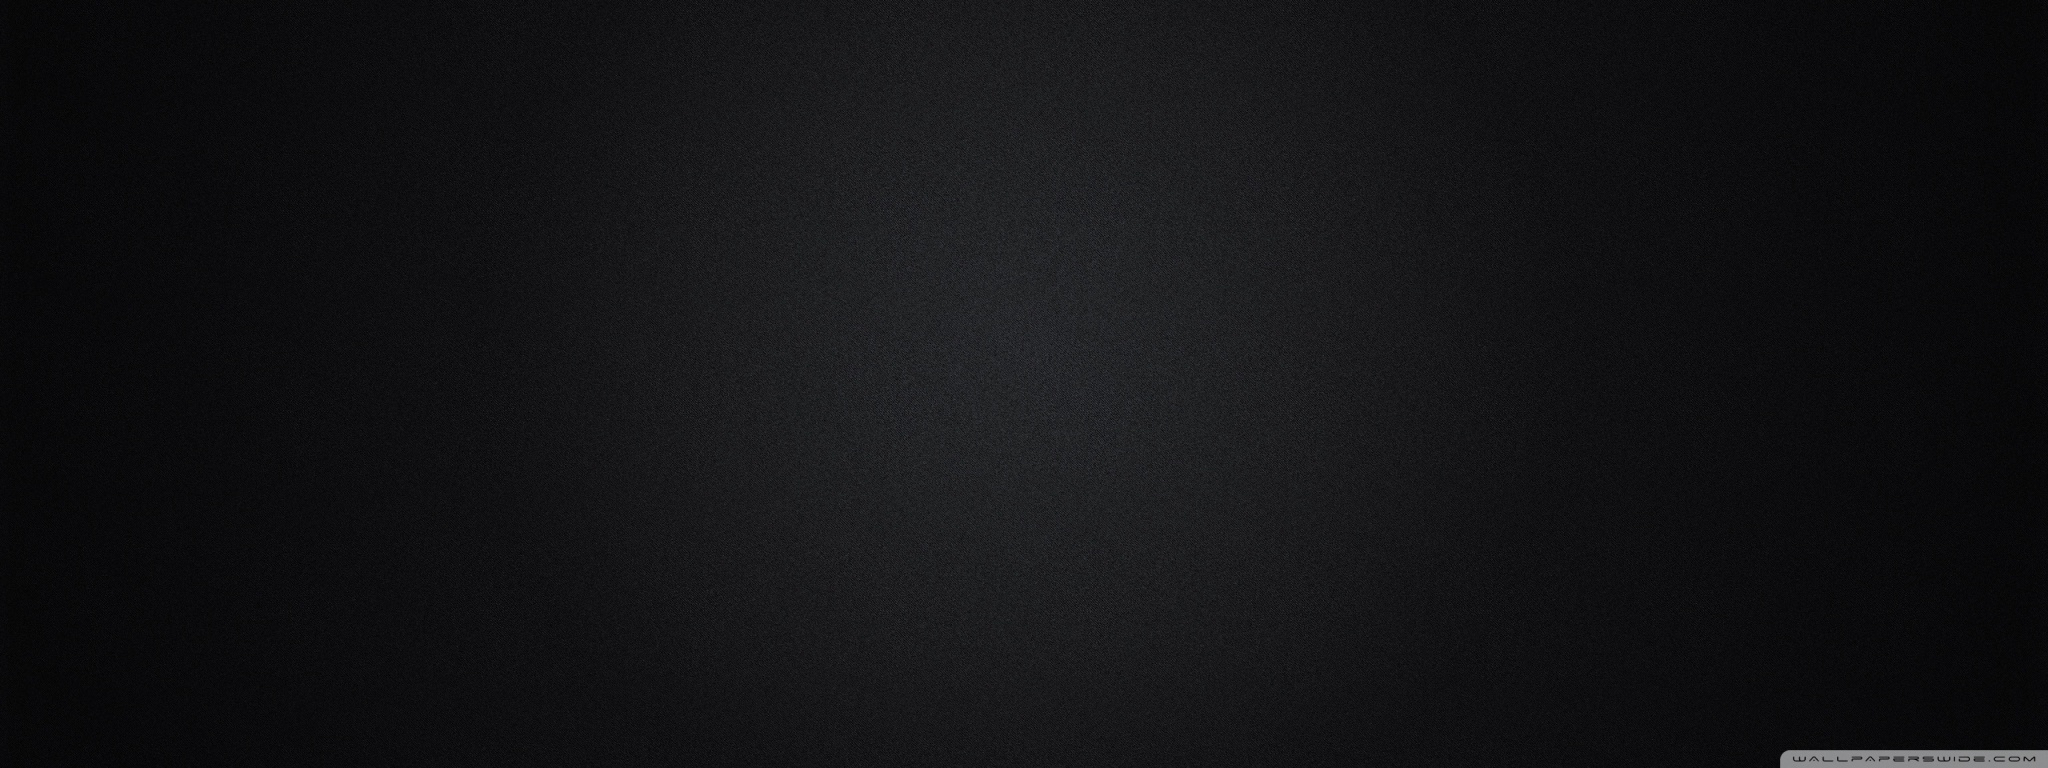 Black Background Fabric Ultra HD Desktop Background Wallpaper for : Multi  Display, Dual Monitor : Tablet : Smartphone